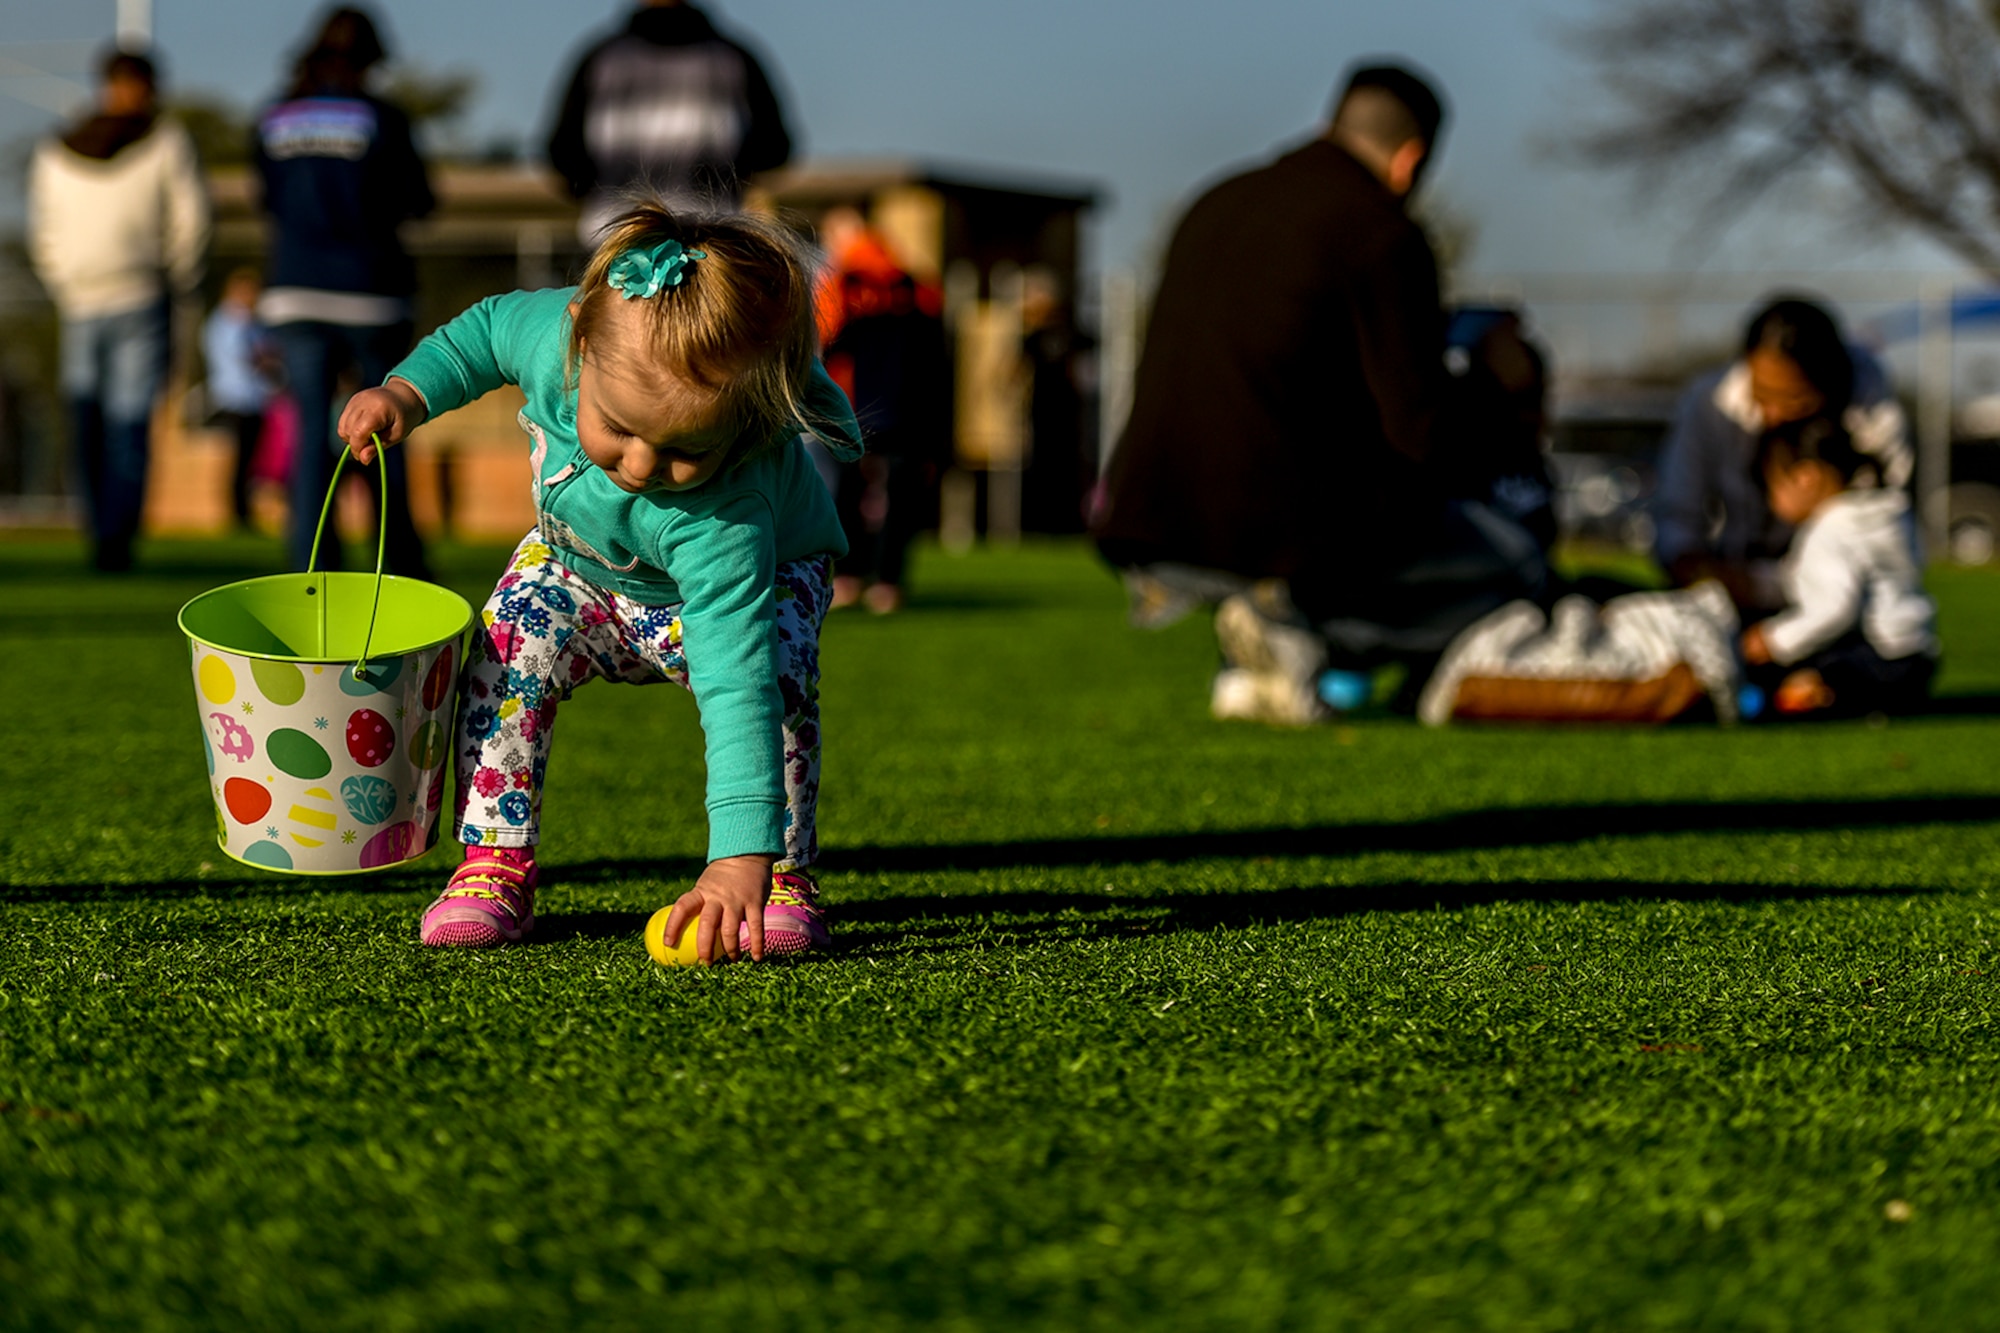 A one-year-old girl picks up an Easter egg at the softball field on Goodfellow Air Force Base, Texas, March 26, 2016. The 17th Force Support Squadron hosted the Easter egg hunt to celebrate the holiday with Goodfellow families. (U.S. Air Force photo by Senior Airman Devin Boyer/Released)